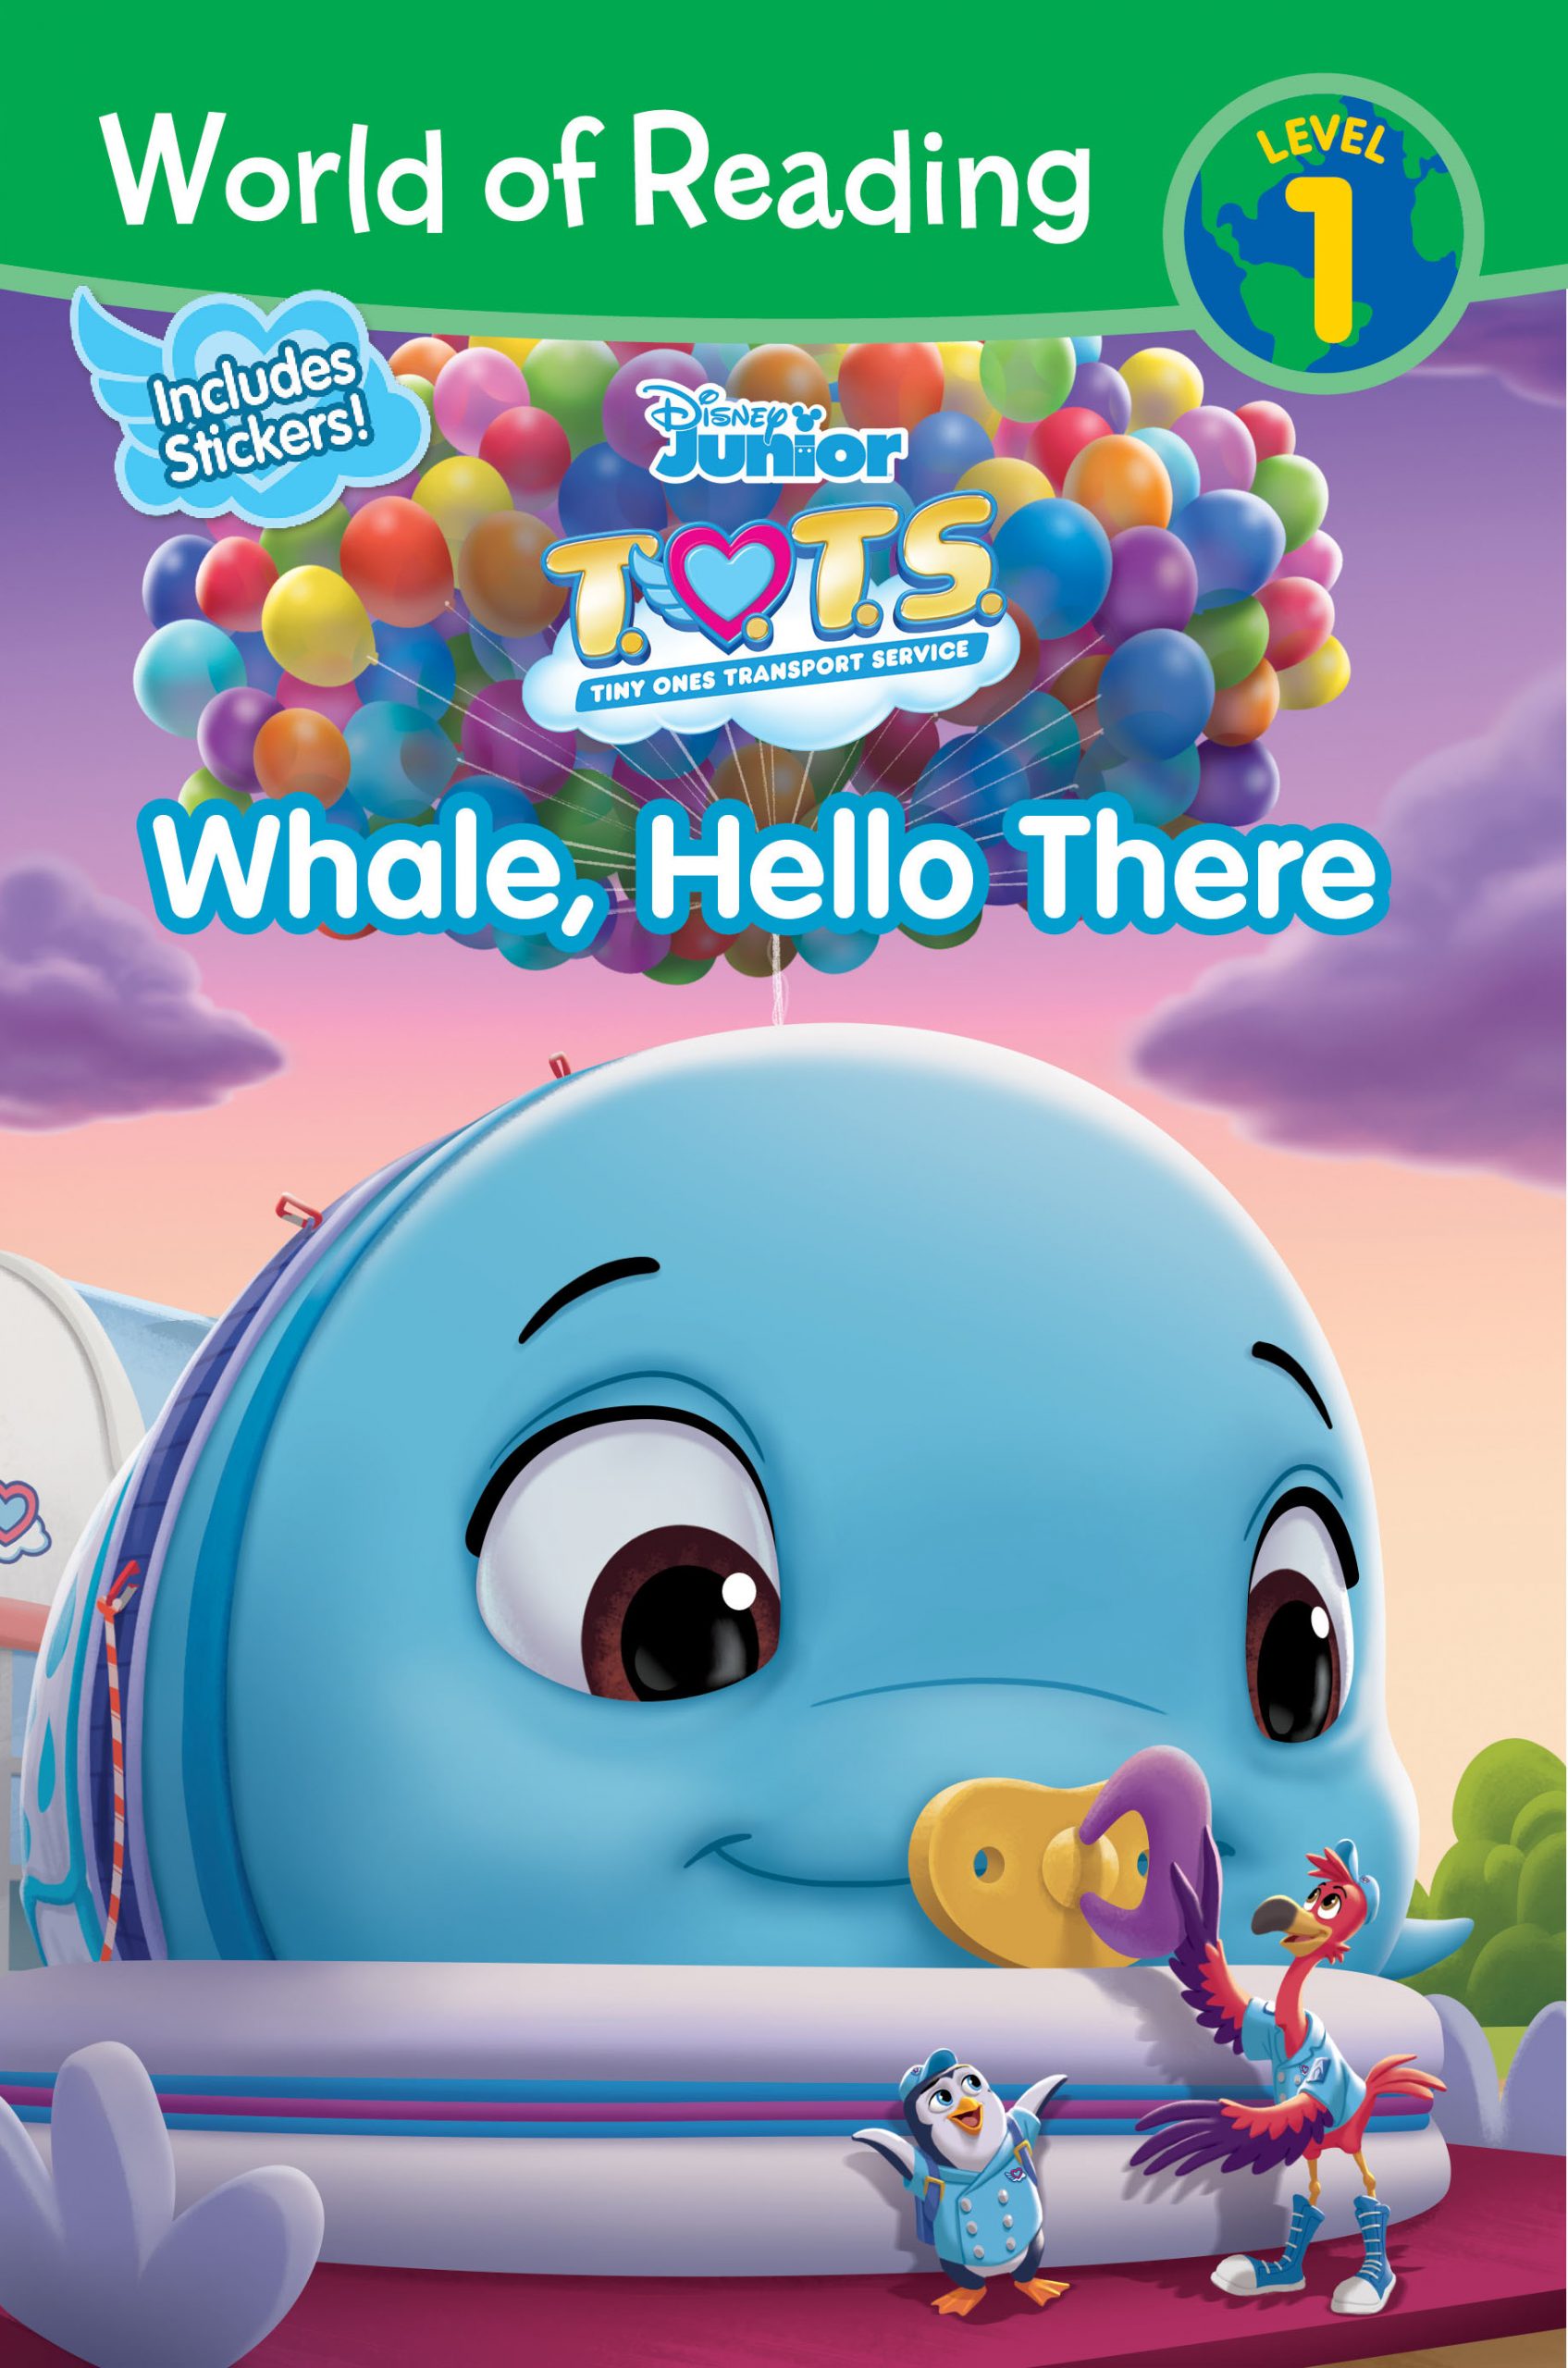 T.O.T.S. Whale, Hello There World of Reading, Level 1 by Disney Books  Disney Storybook Art Team - World of Reading - Disney, Disney Junior,  T.O.T.S. Books